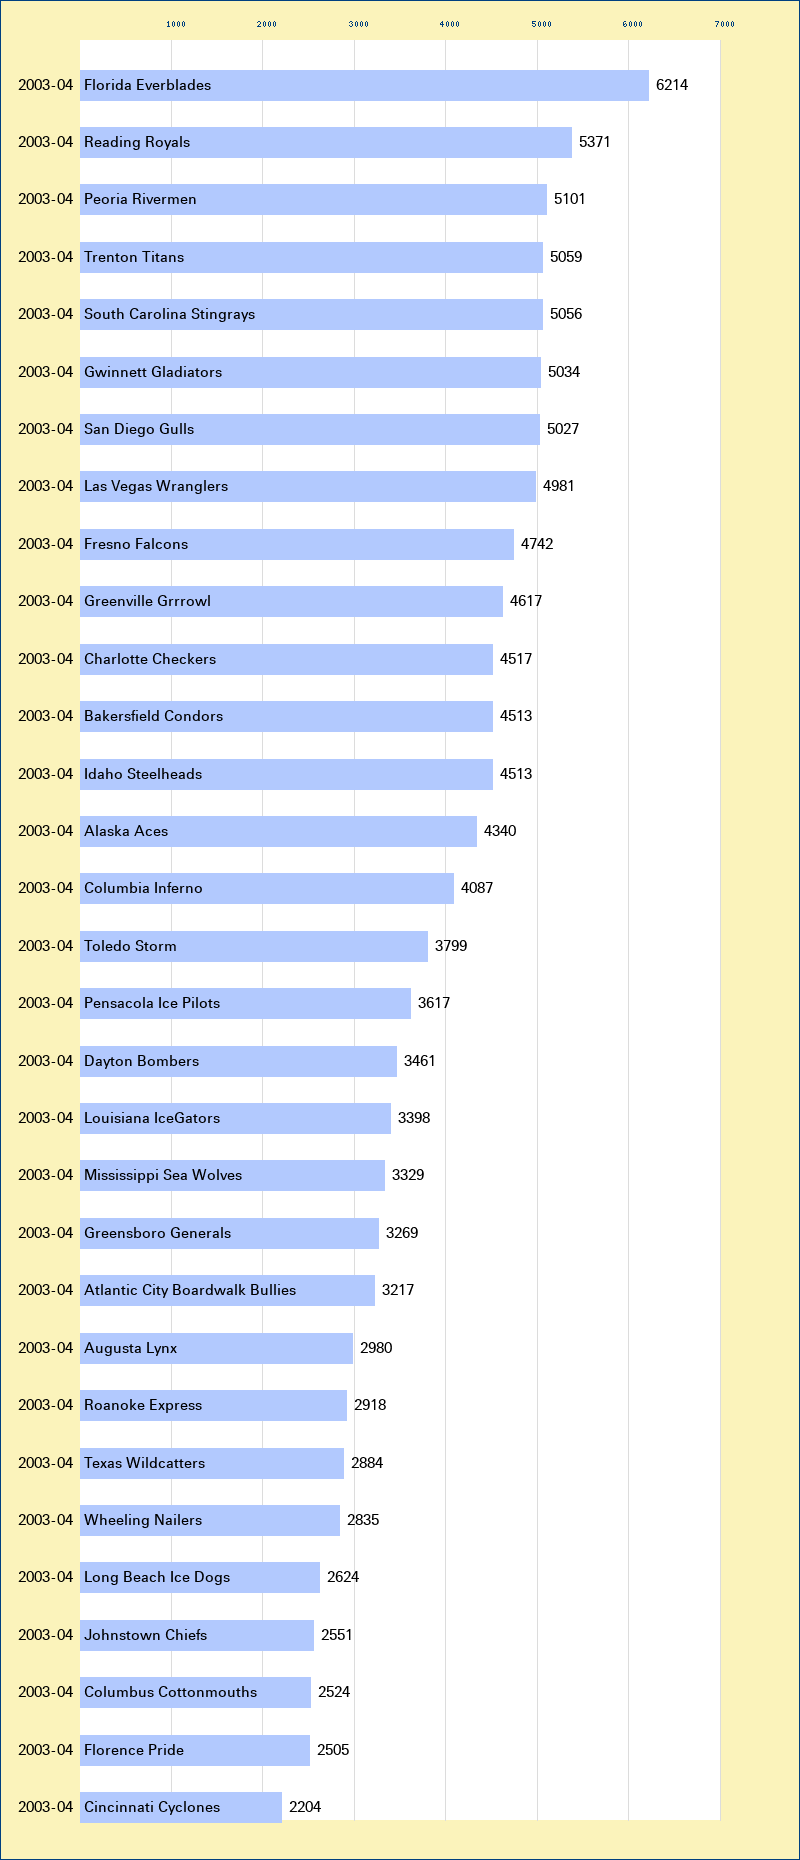 Attendance graph of the ECHL for the 2003-04 season